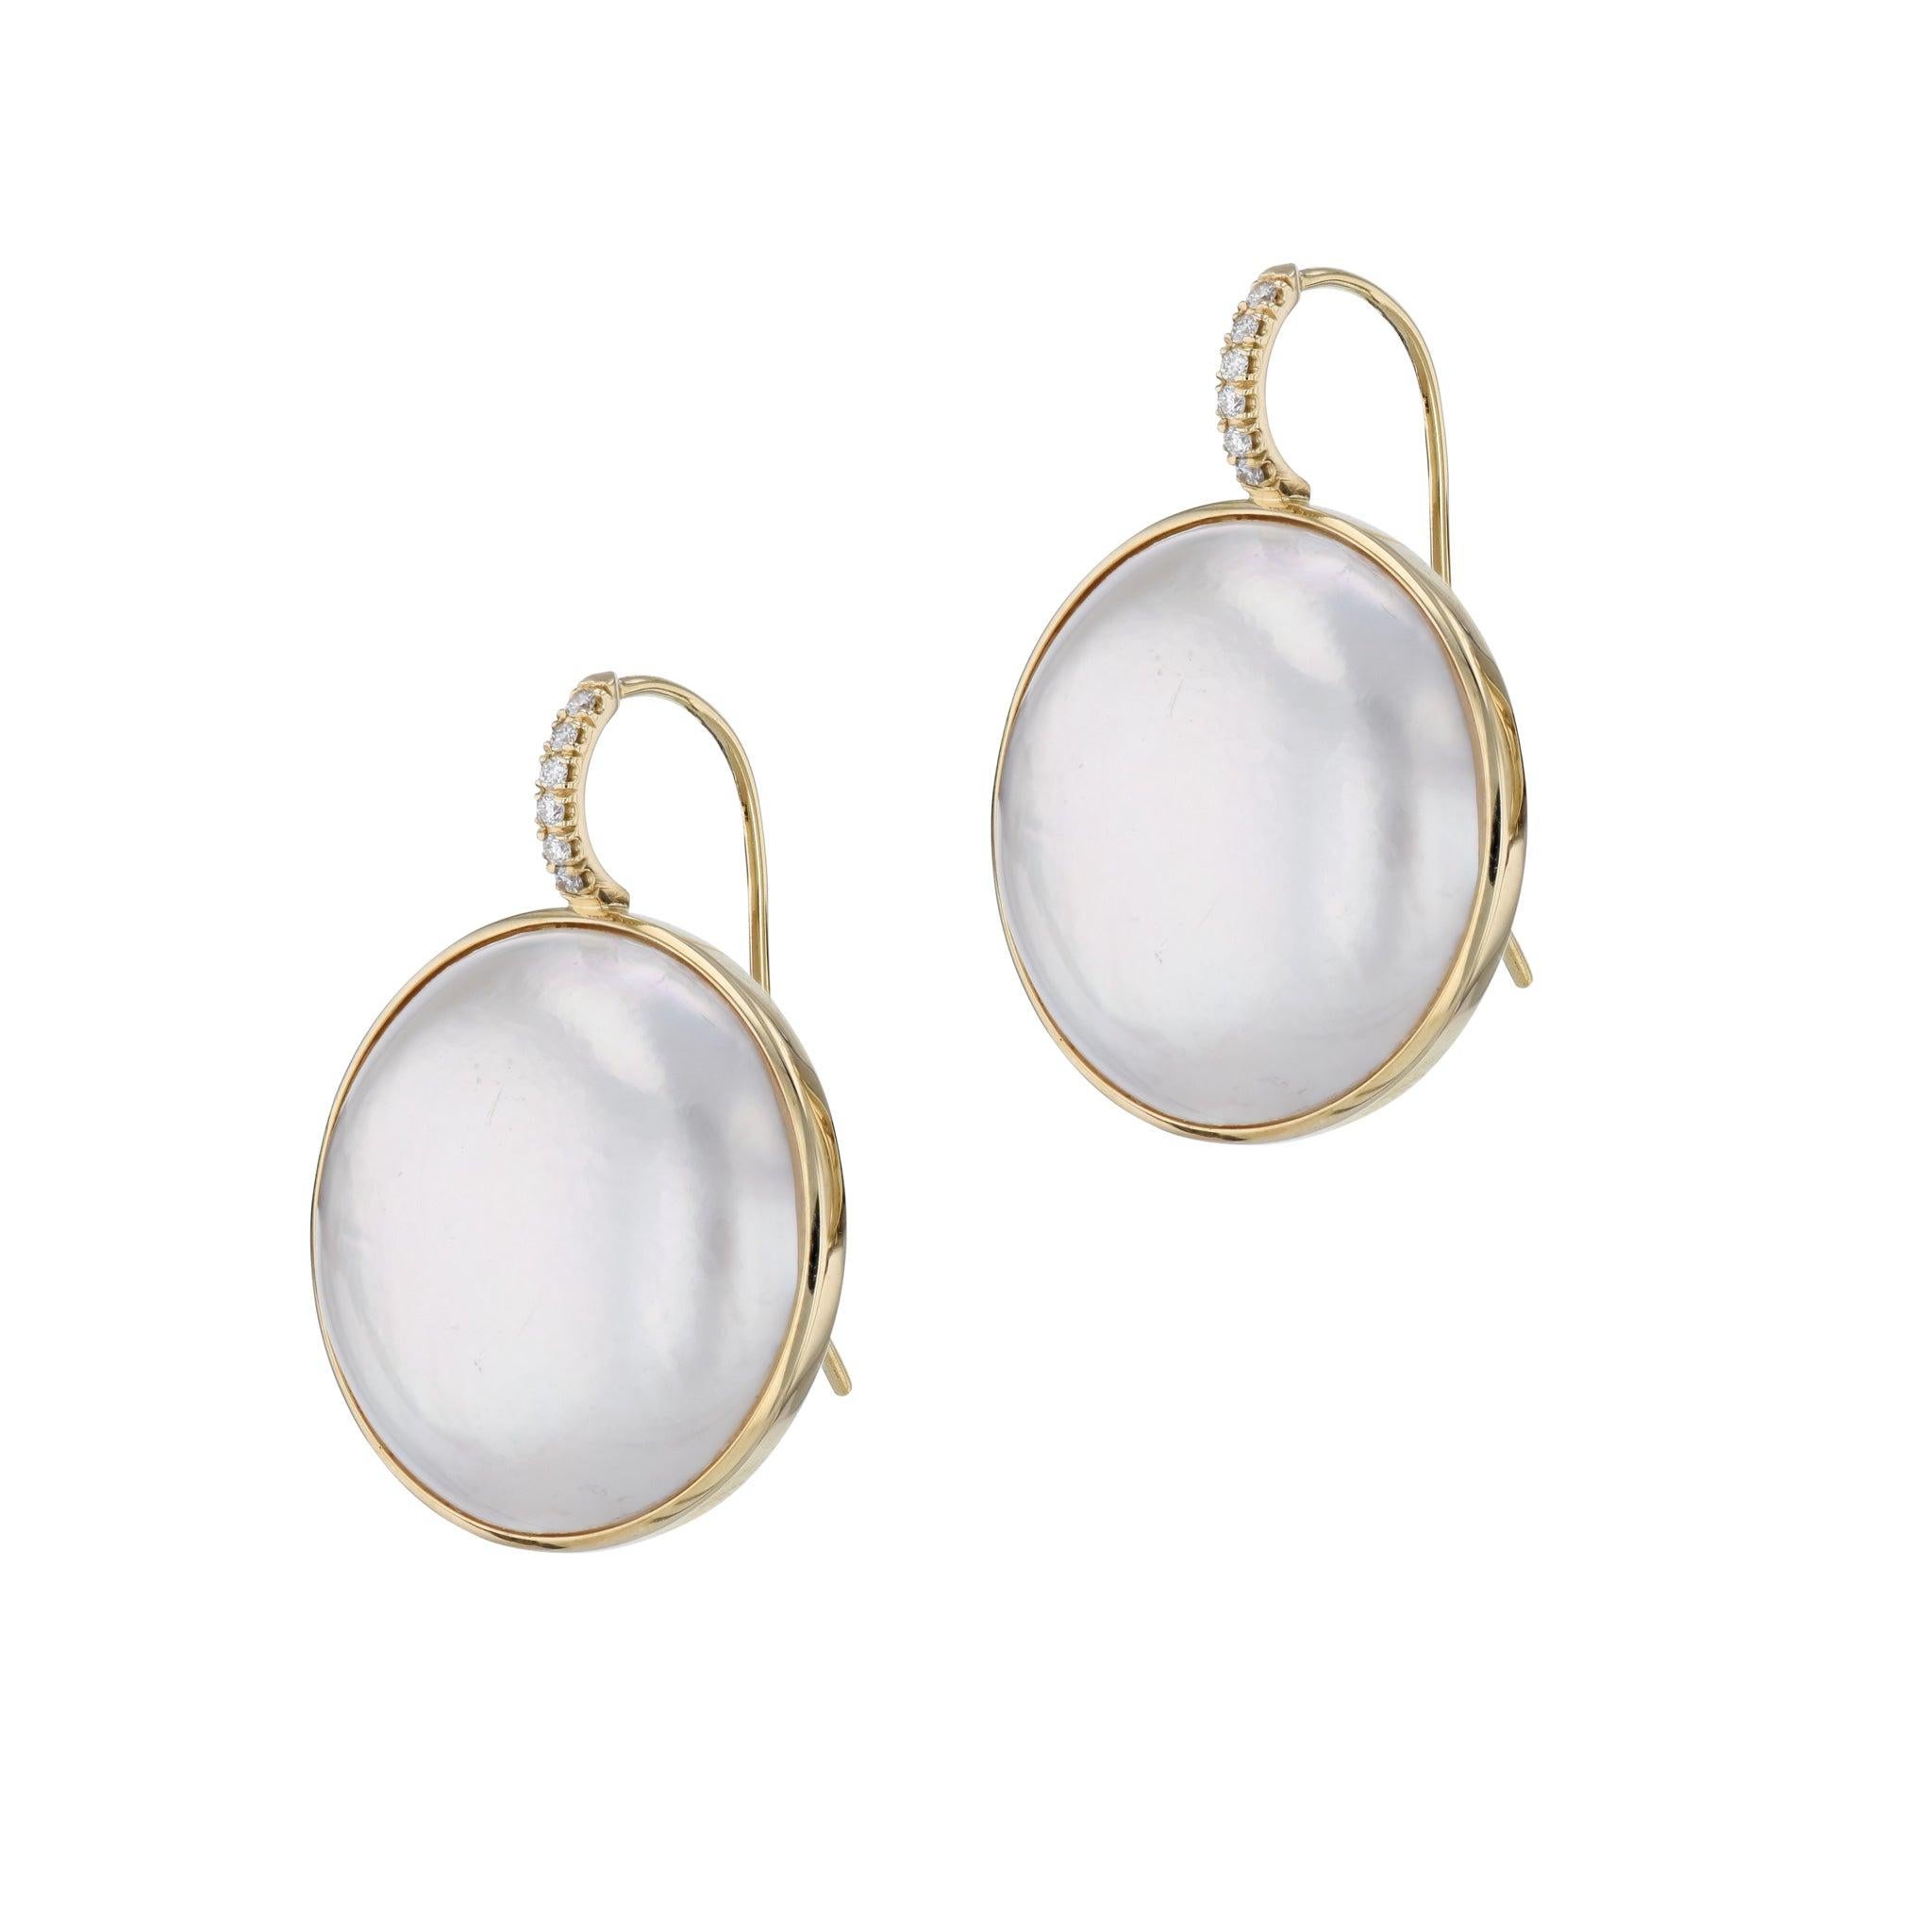 Experience the luxury of Mobe Pearl Diamond Yellow Gold Drop Earrings! Hand-crafted from 18kt yellow gold with pave diamonds and an elegant Mobe pearl, these earrings are something special. Propel yourself into glamour and sophistication with this